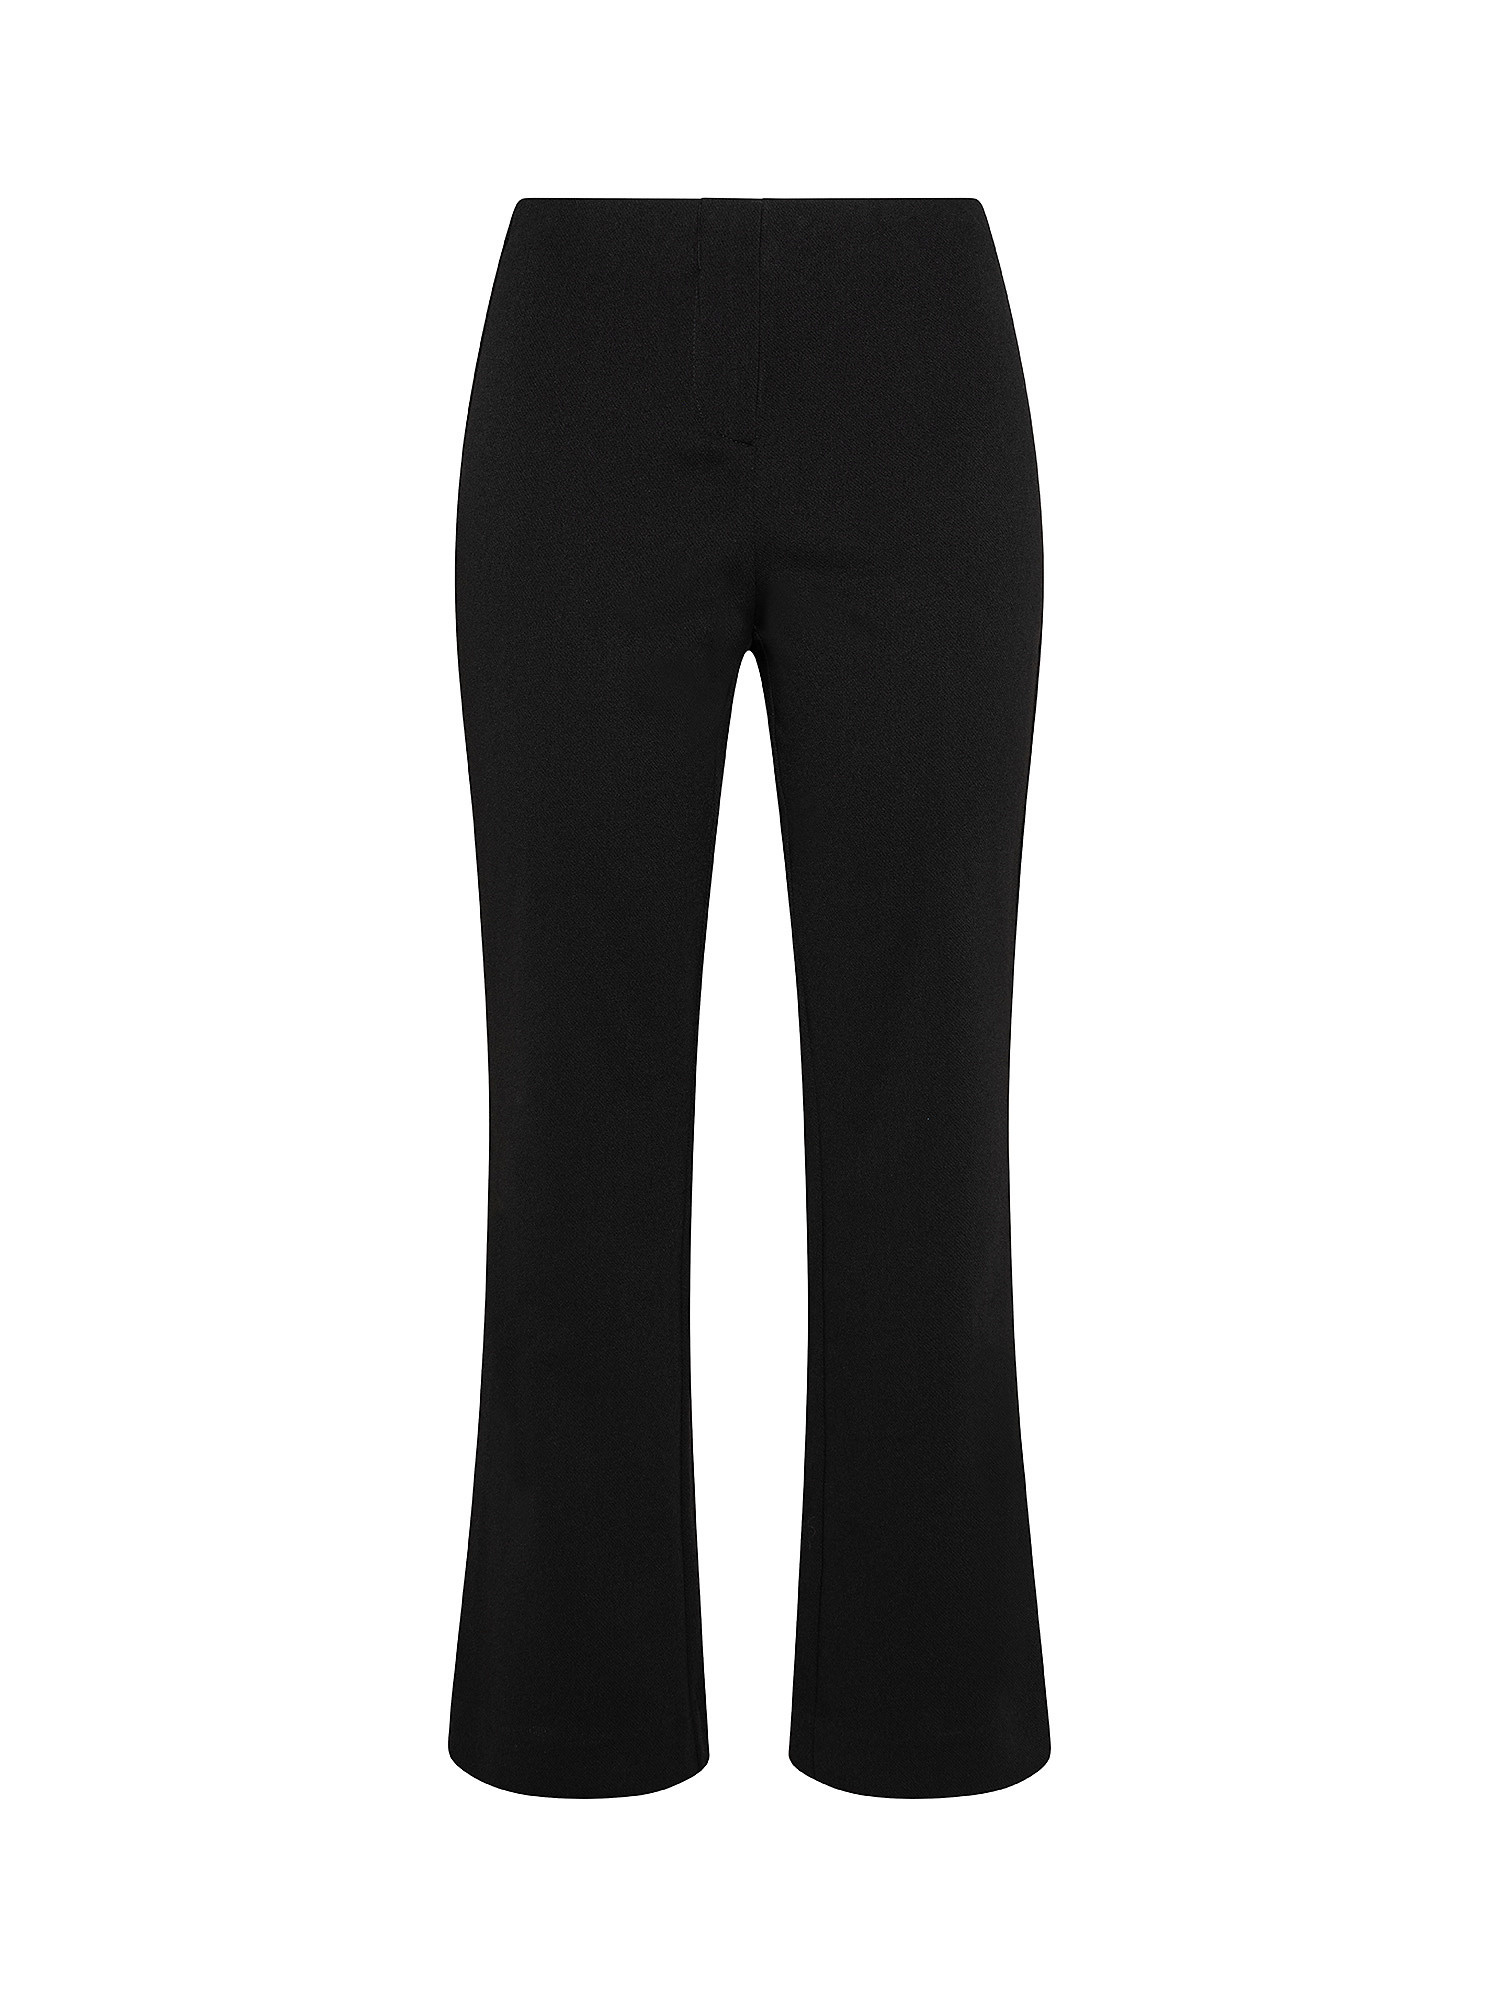 Flare trousers, Black, large image number 0